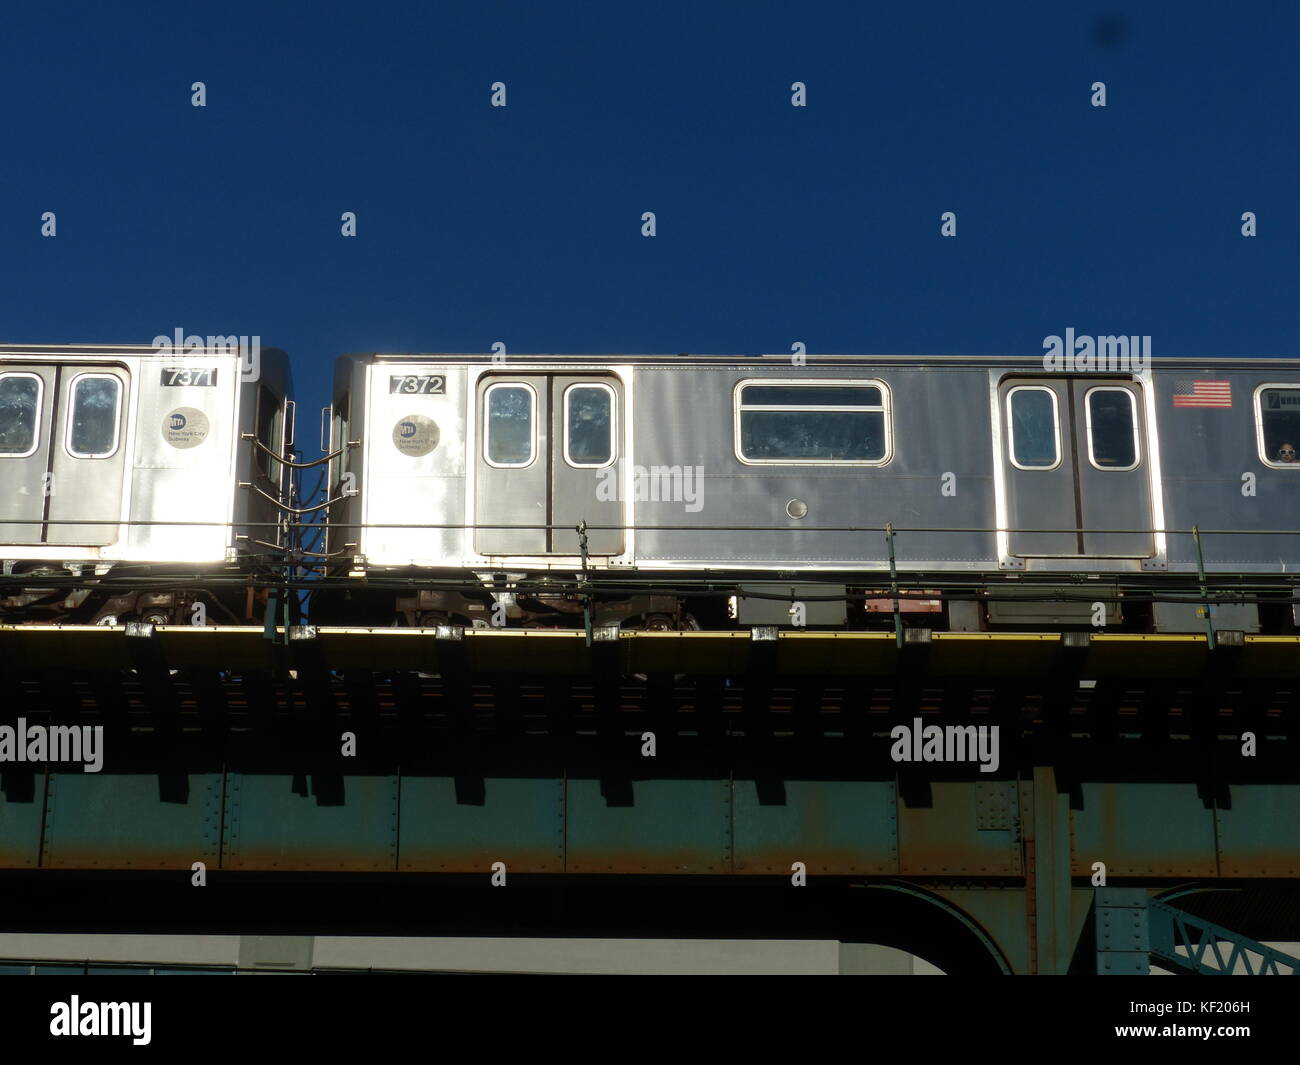 View of elevated subway with # 7 train bound for Astoria passing by Stock Photo